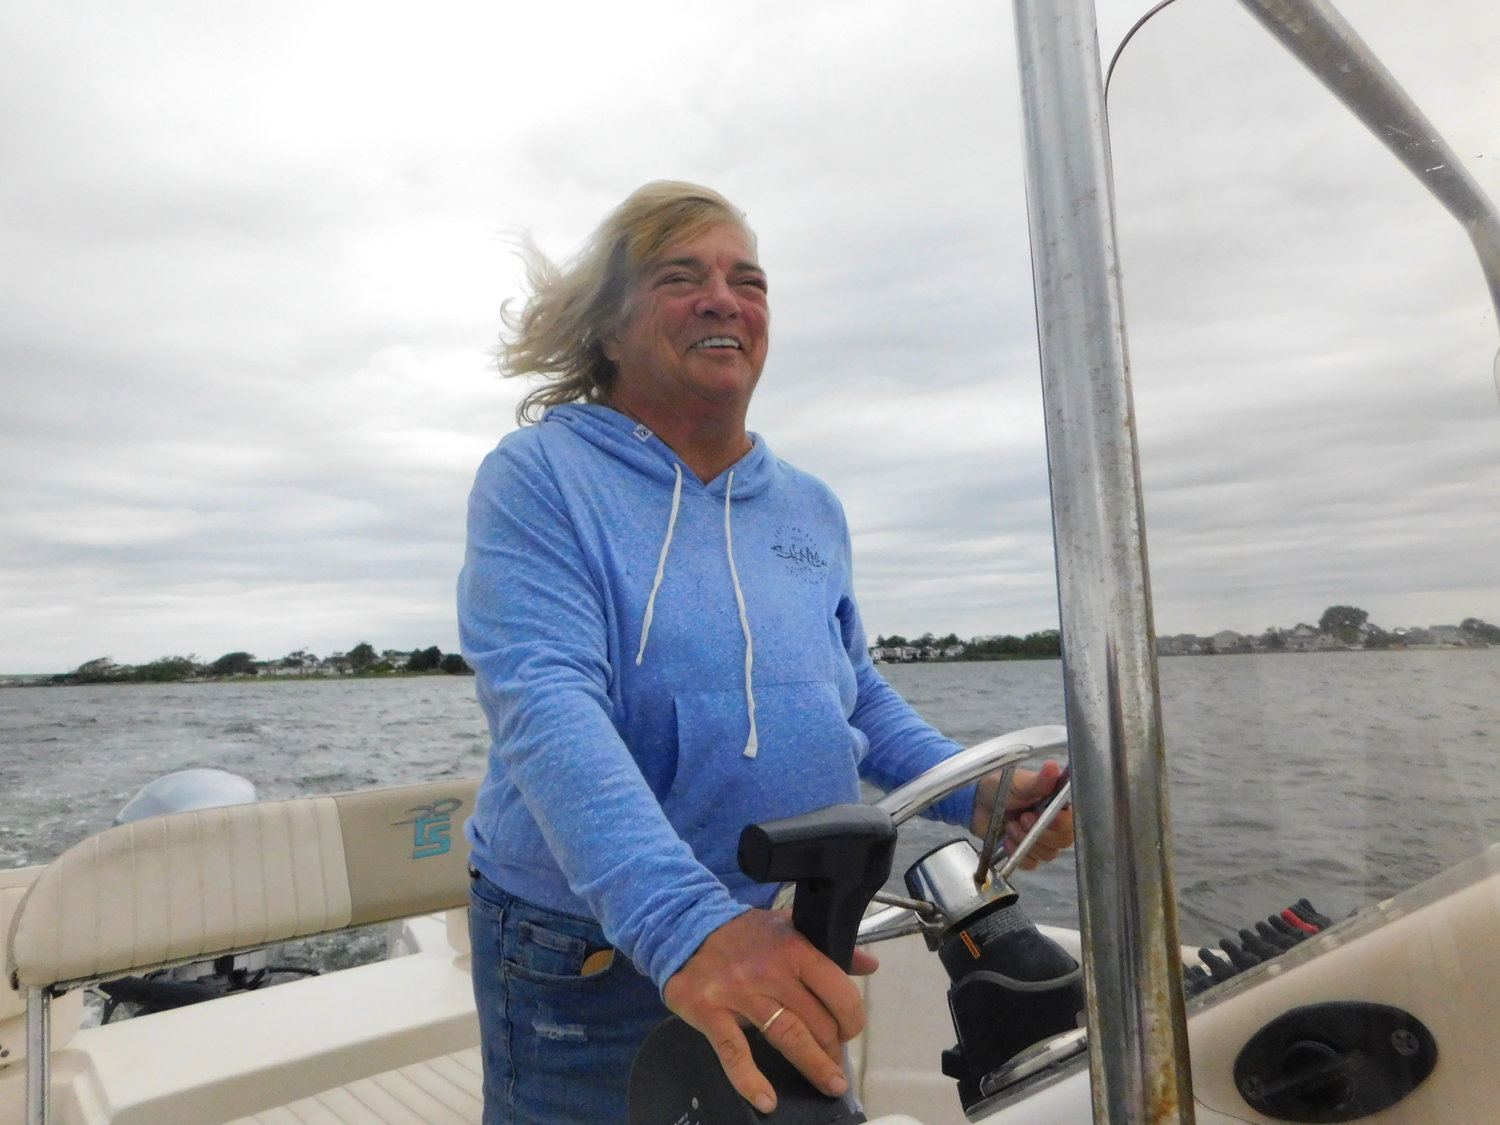 Sue Lyons steered her center console outboard boat from her Freeport home to the bay house.